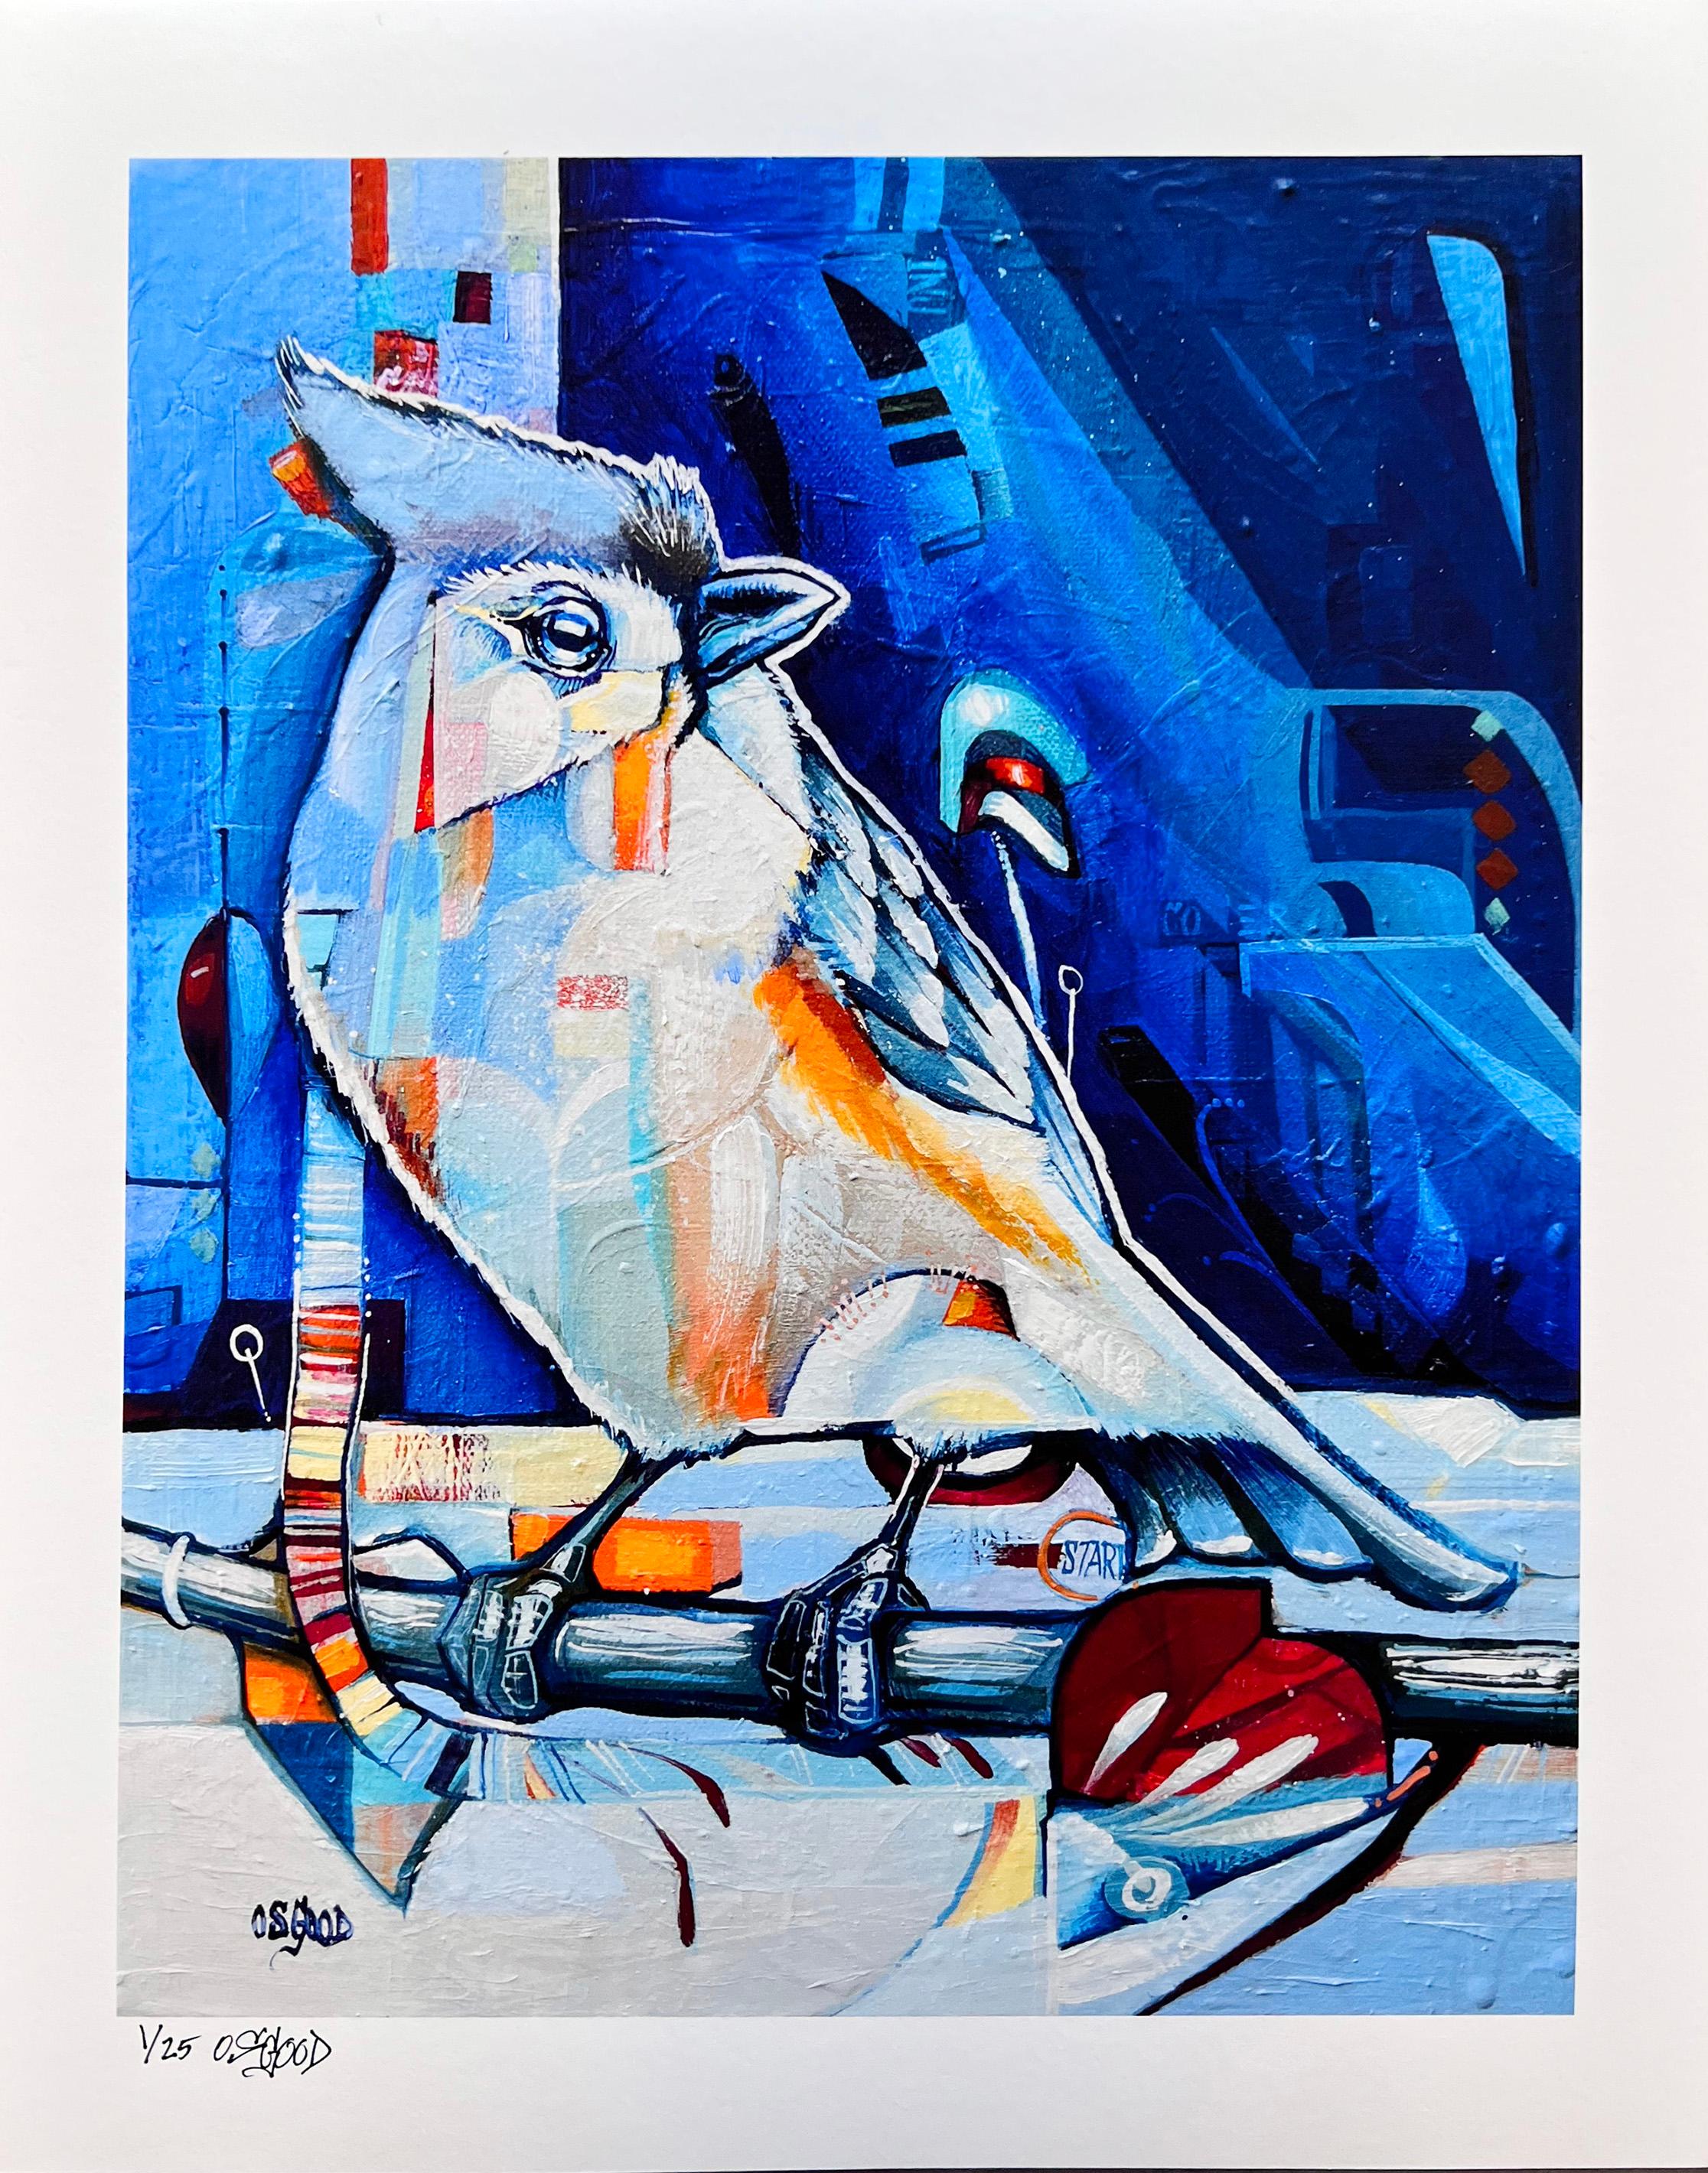 'The Time of Reflection Fine Art Print ' is a contemporary bird fine art print by contemporary urban artist John Osgoodl. It measures  16 x 12 inches in size, with the printed image itself spanning 12.5 x 10 inches. This piece is part of a limited